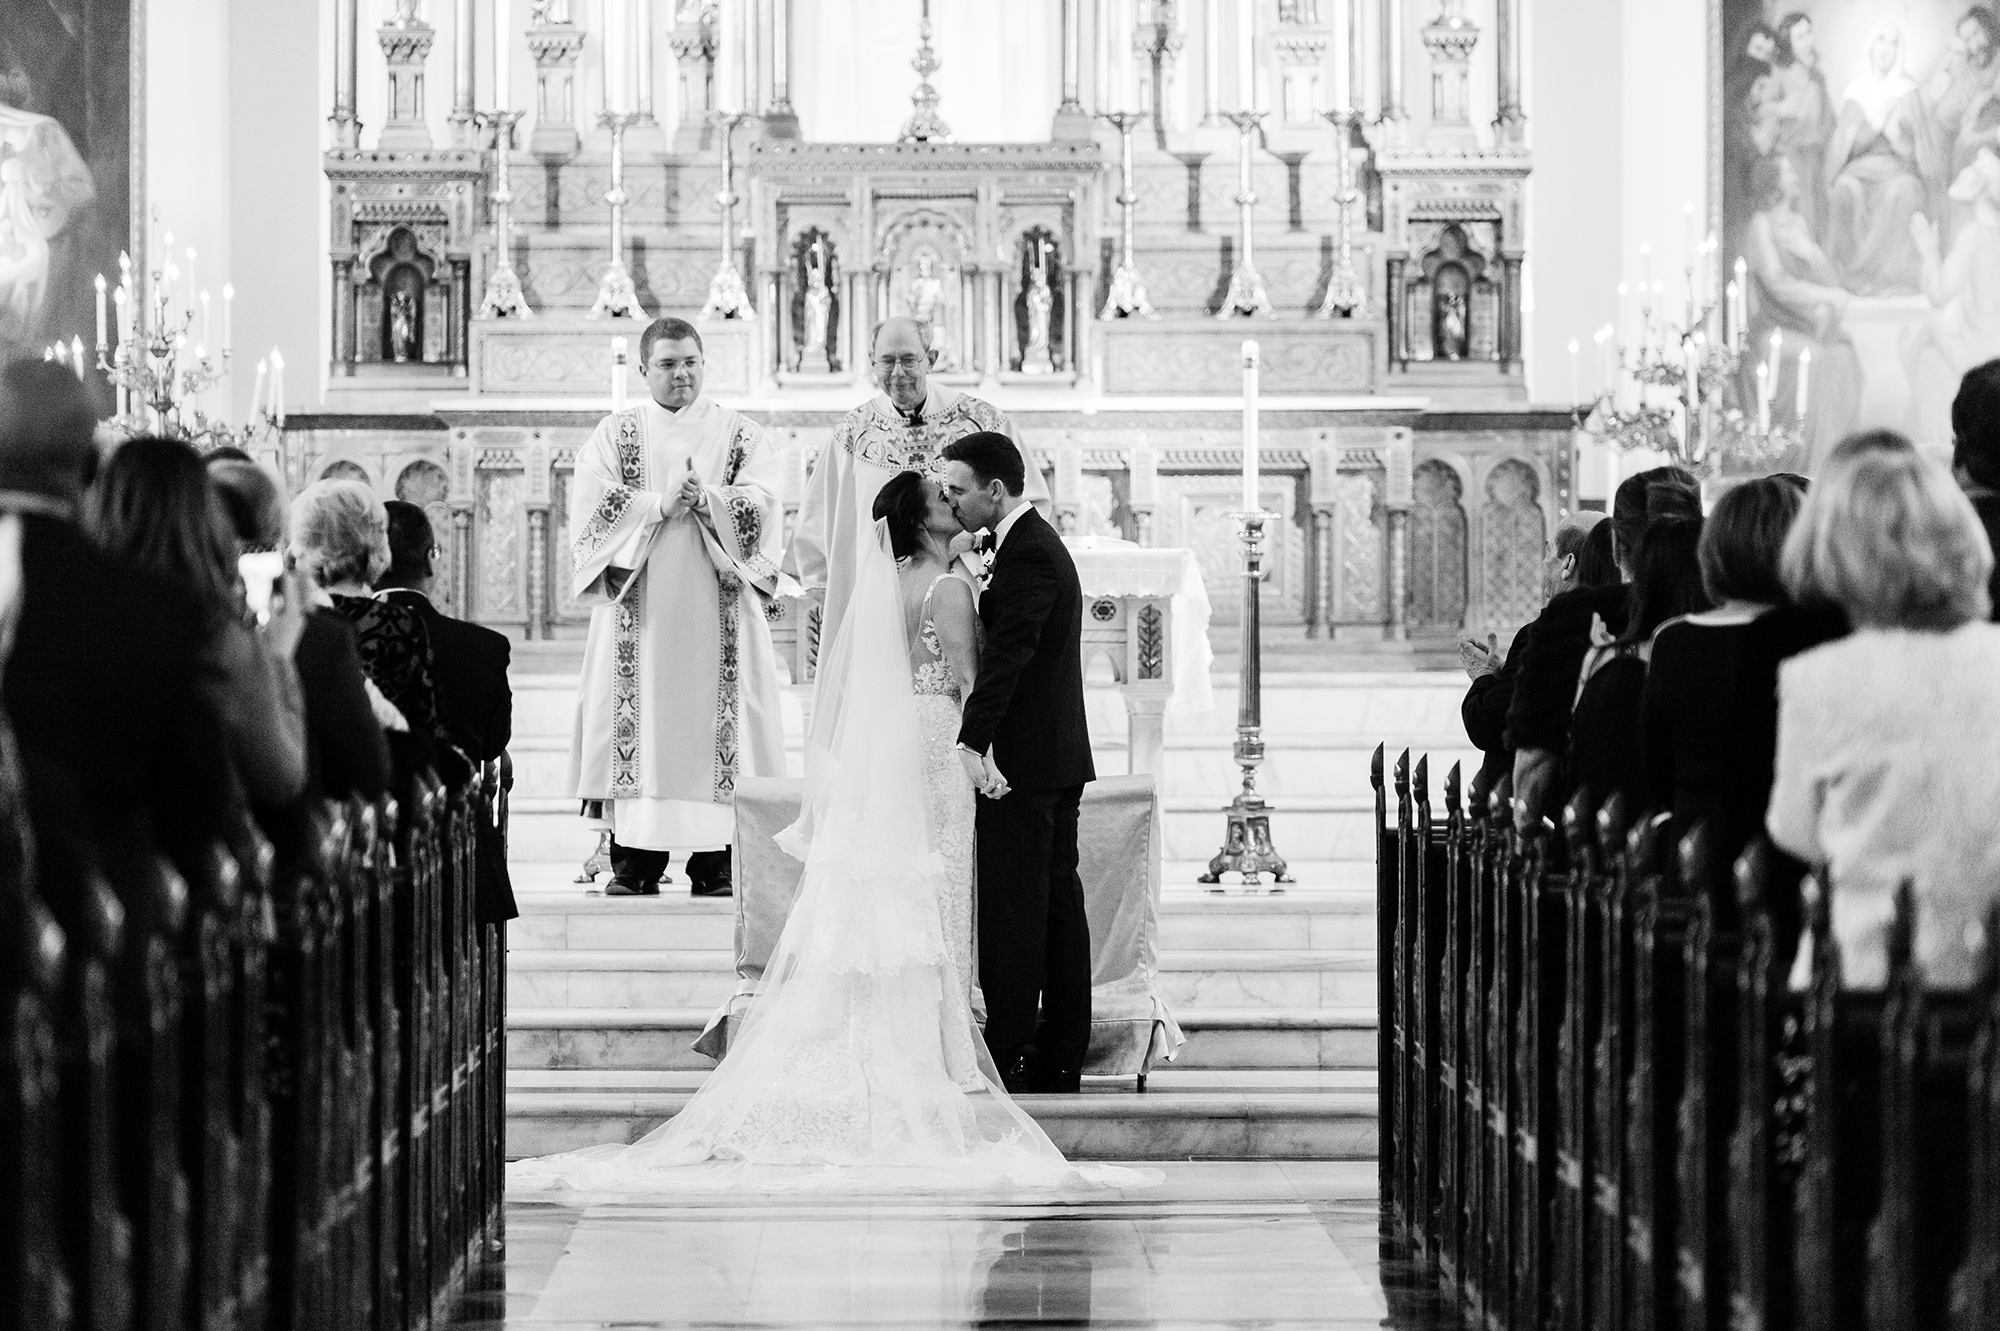 bride and groom at altar in church during ceremony